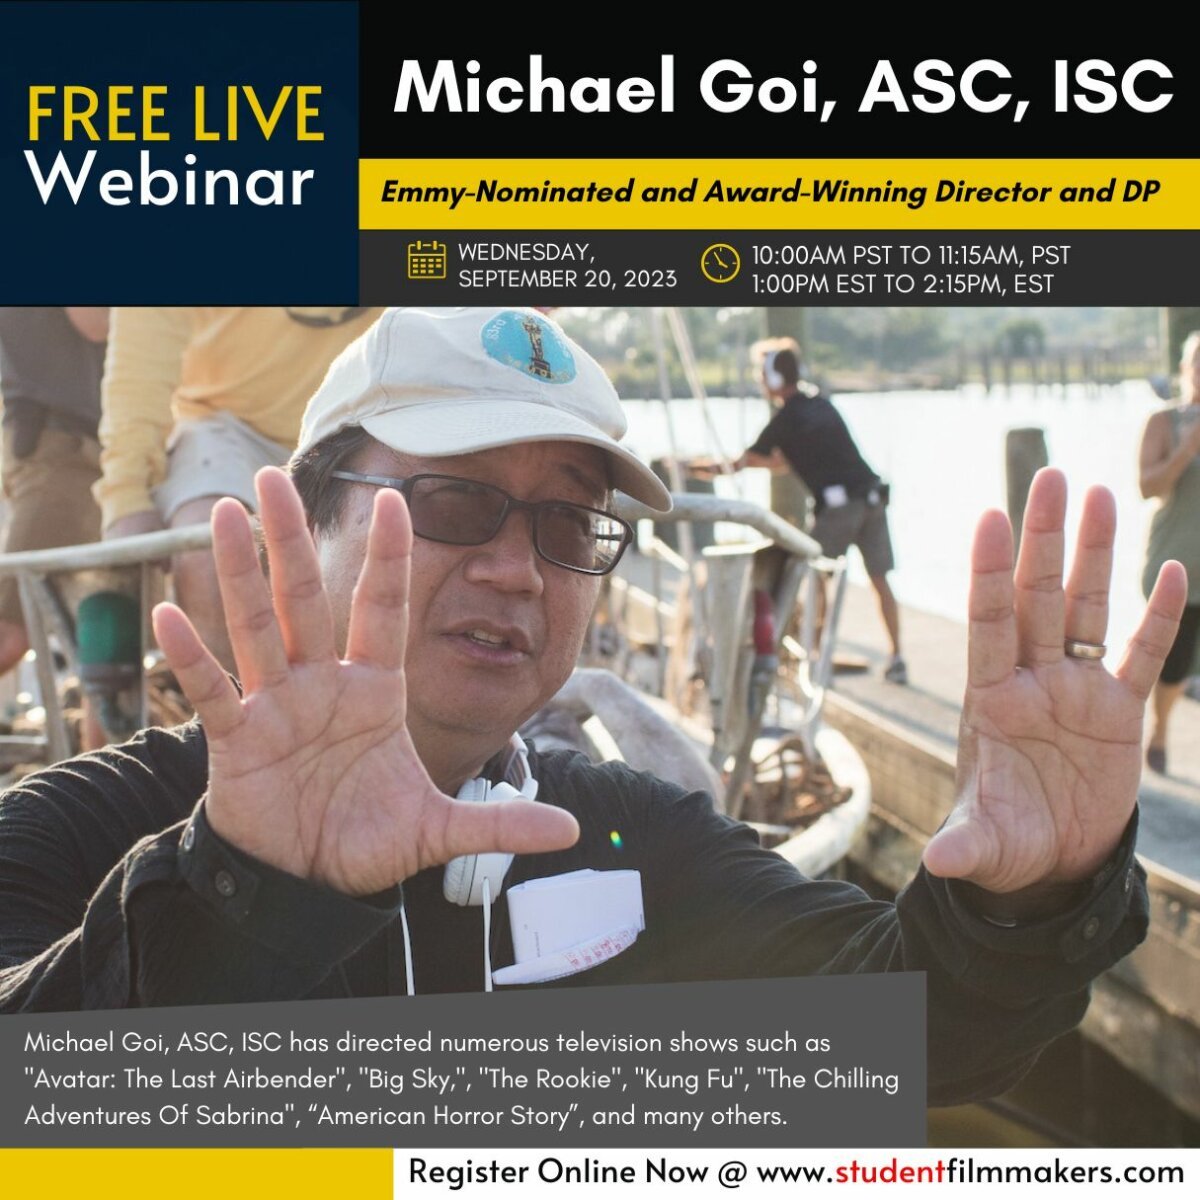 Free Live Filmmaking Webinar: Michael Goi, ASC, ISC Emmy-Nominated and Award-Winning Director and DP